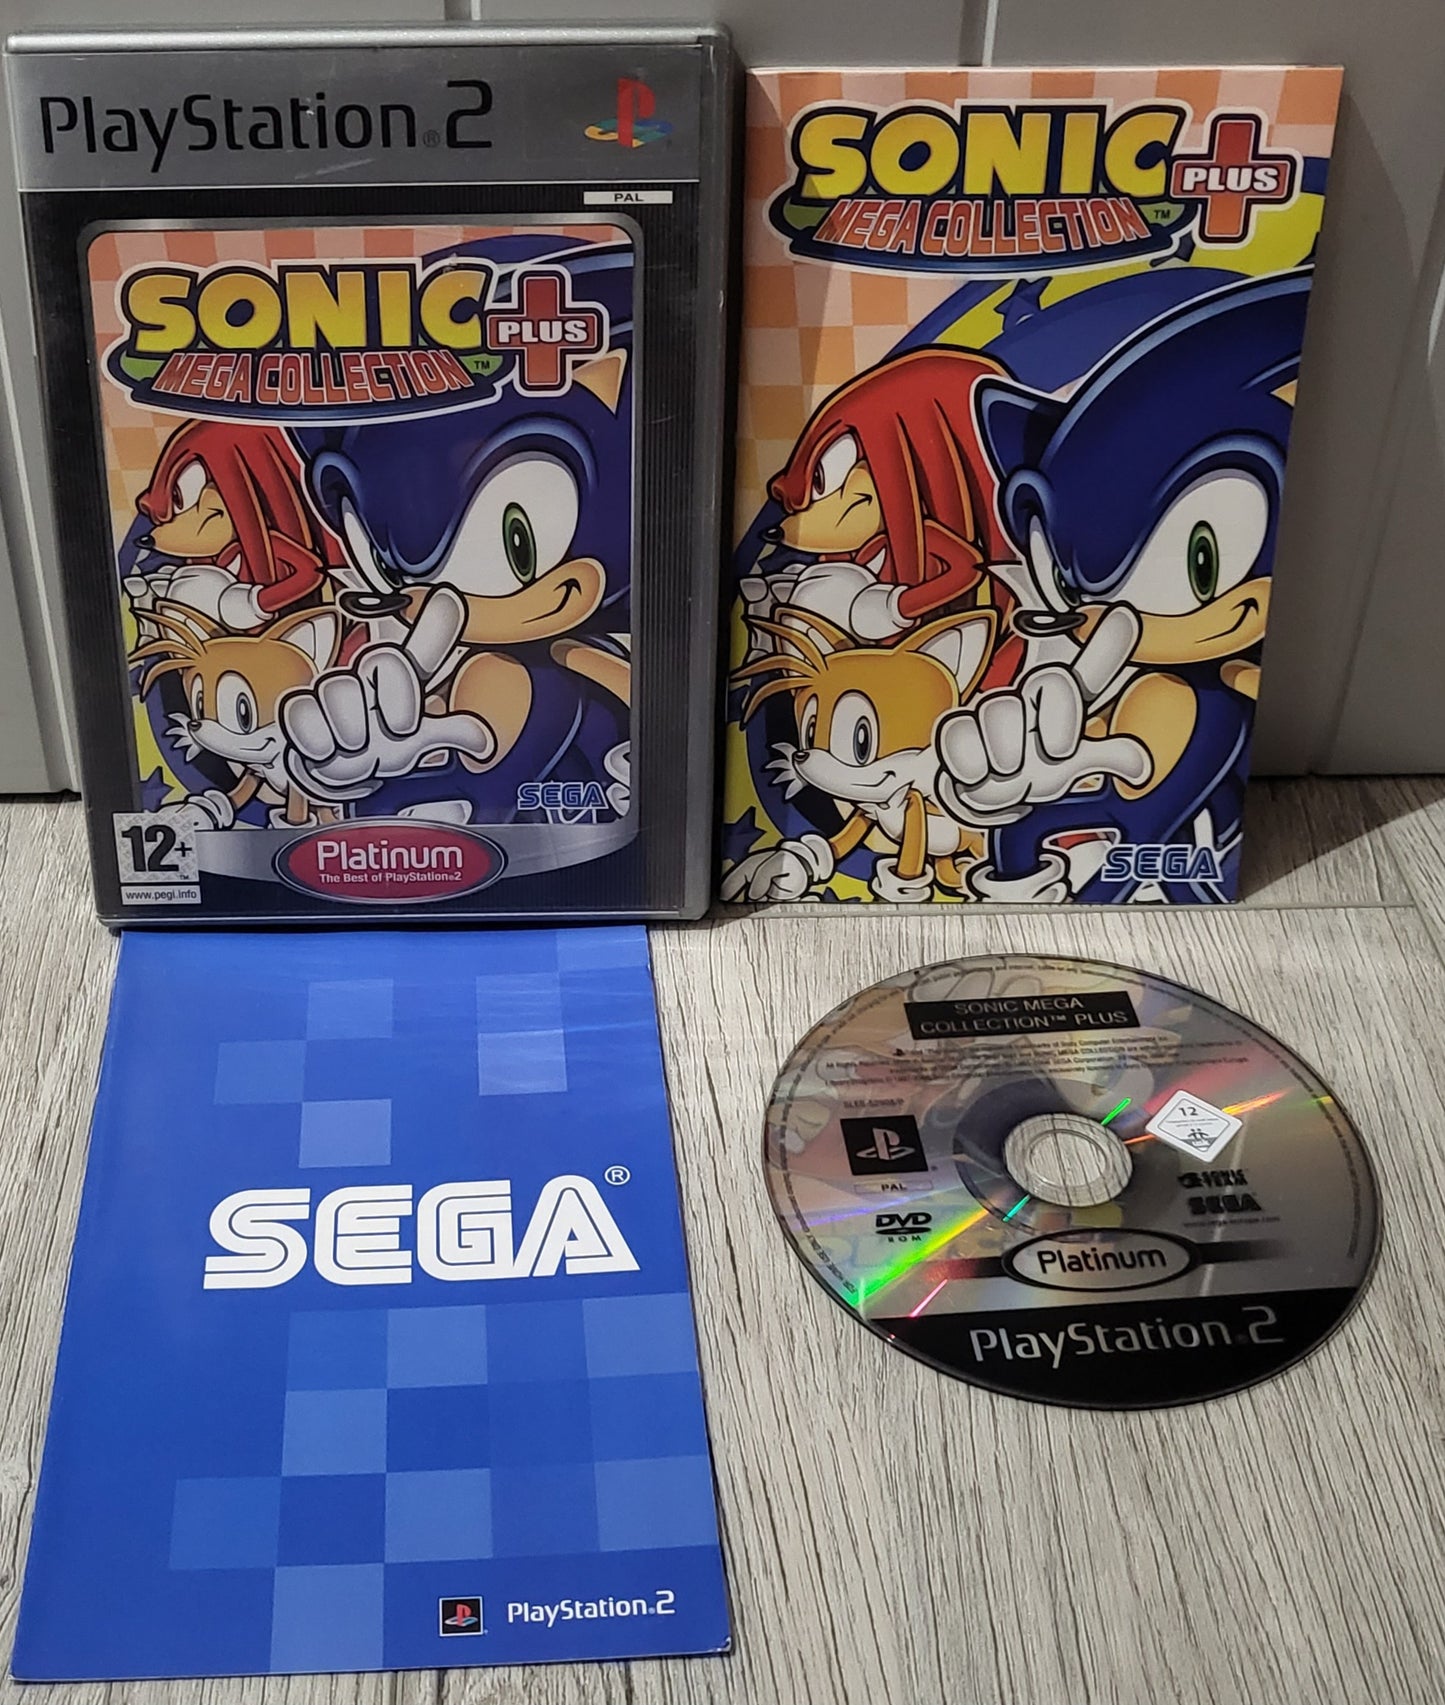 Sonic Mega Collection Plus Platinum Sony PlayStation 2 (PS2) Game